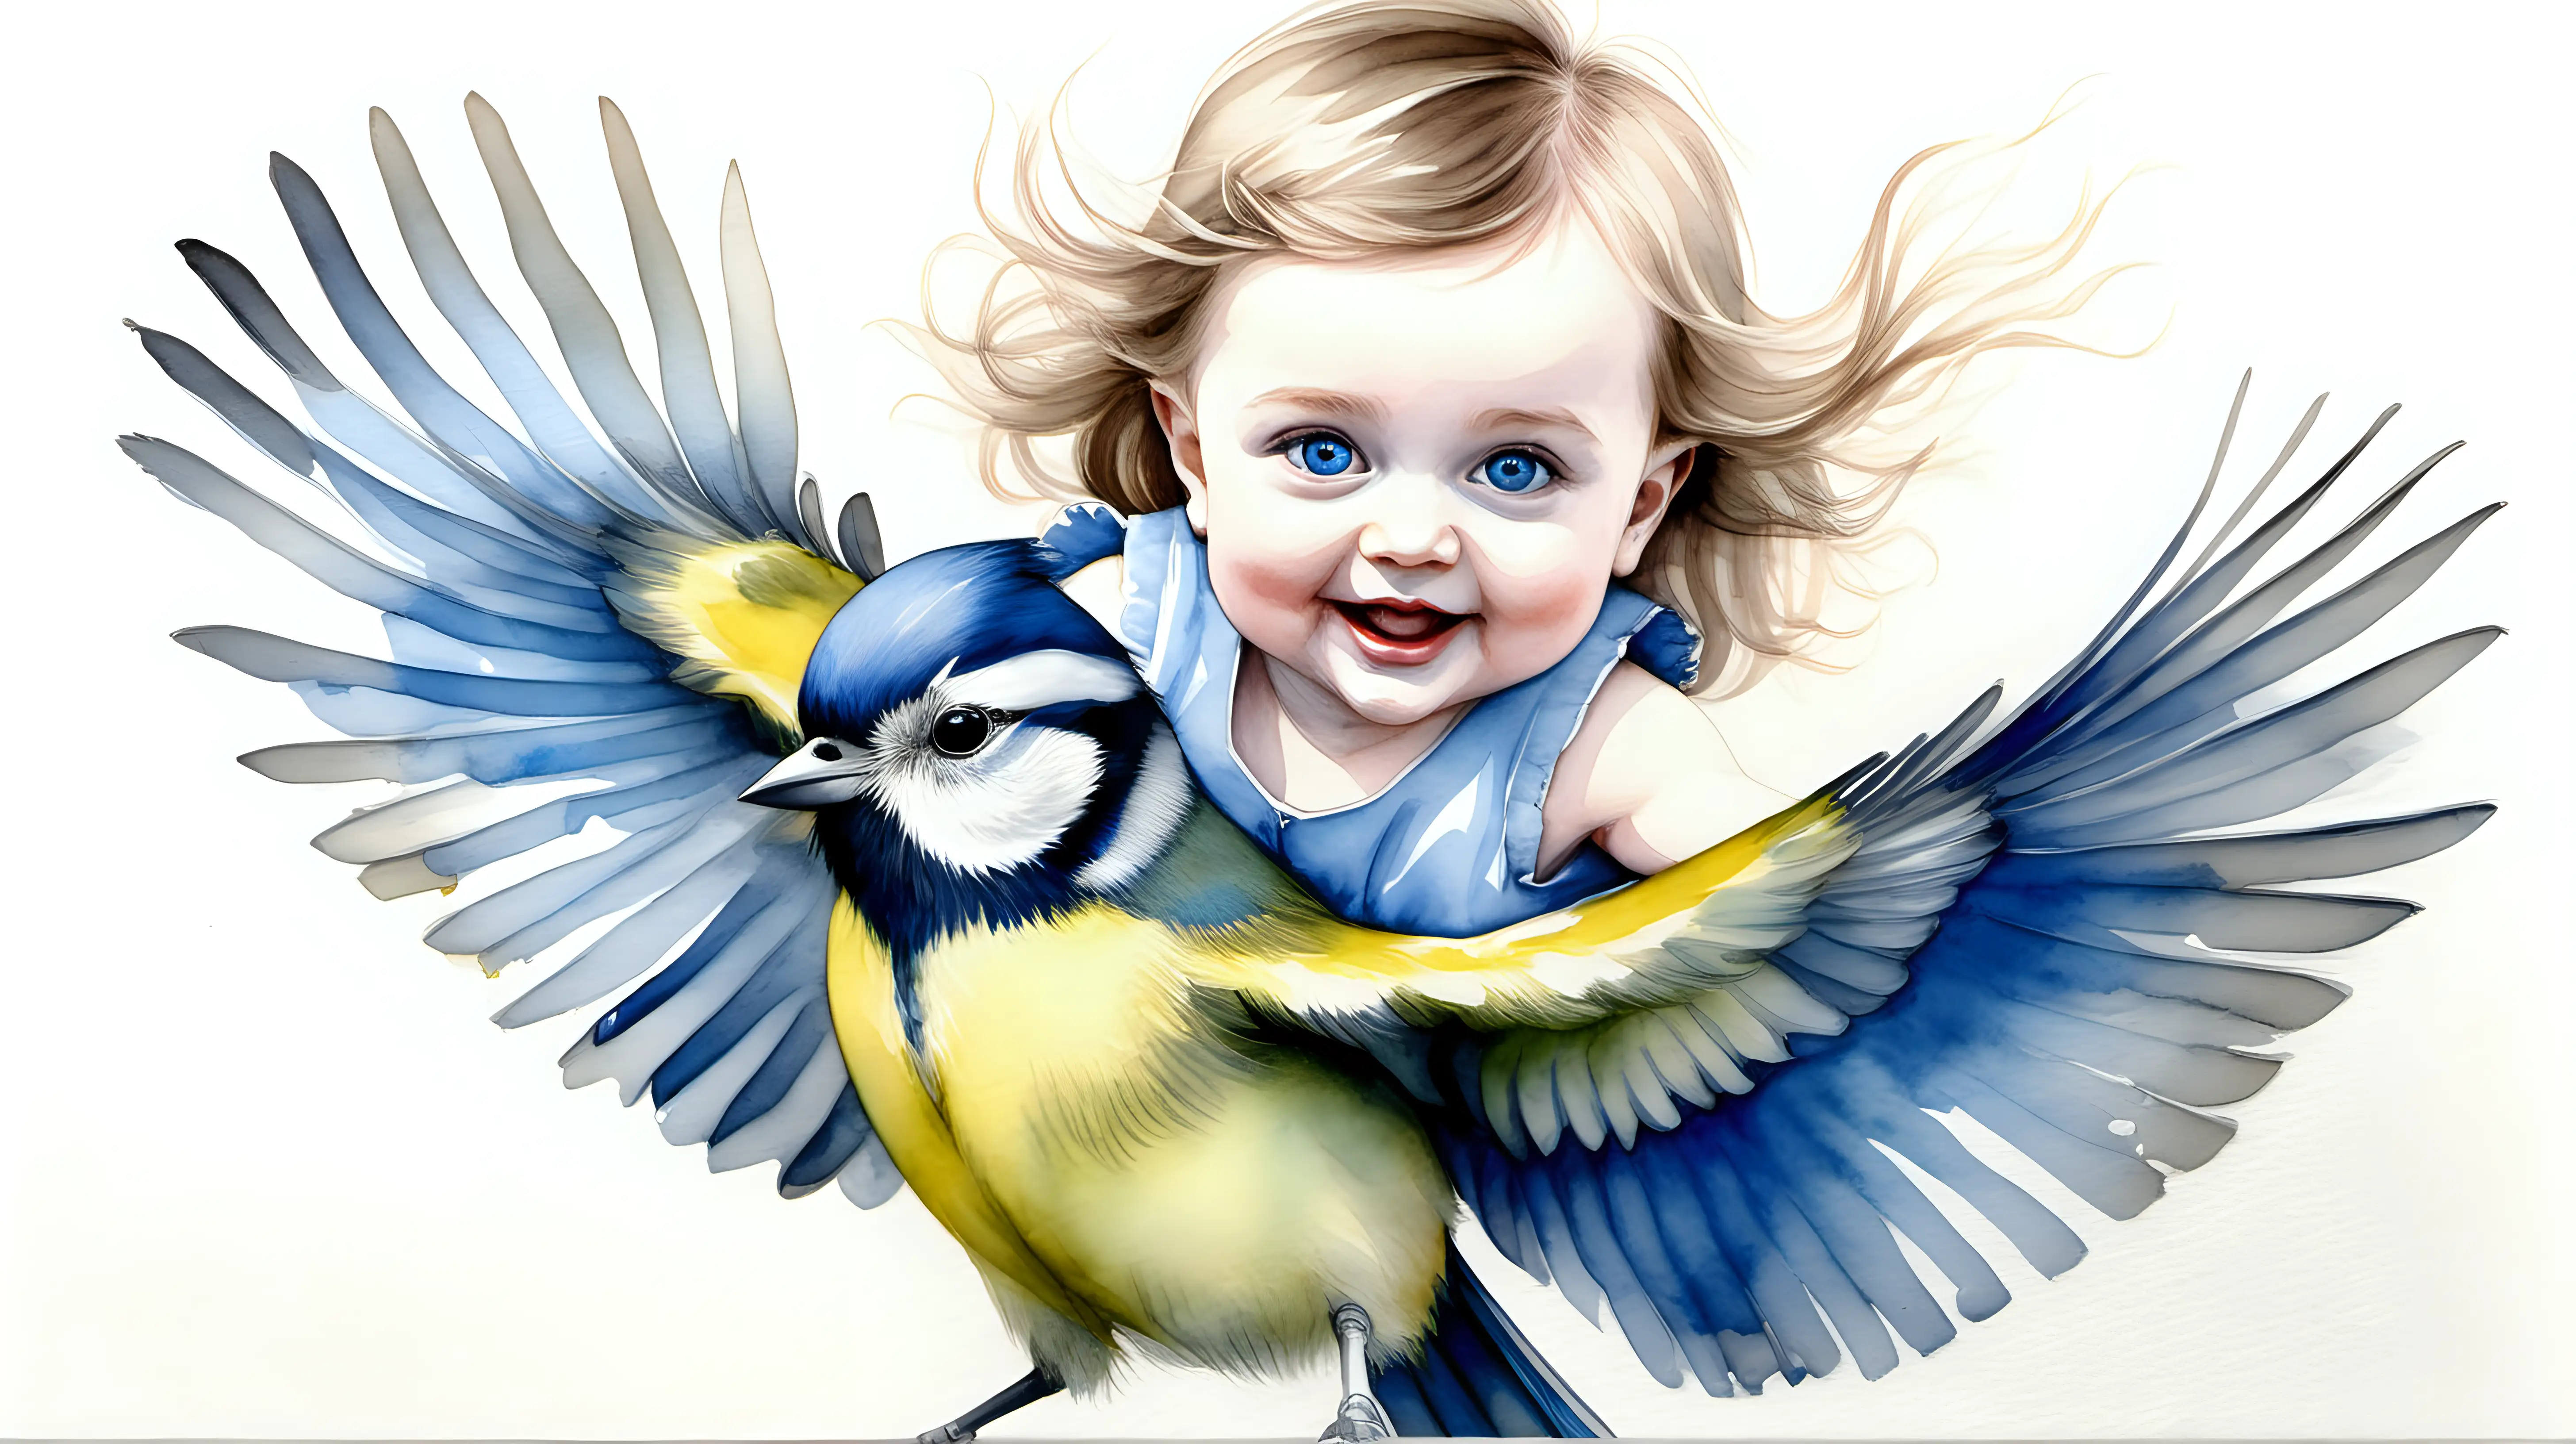 A watercolour painting of beautiful blue eyed baby girl with darkblond hair riding on the back of a bluetit







